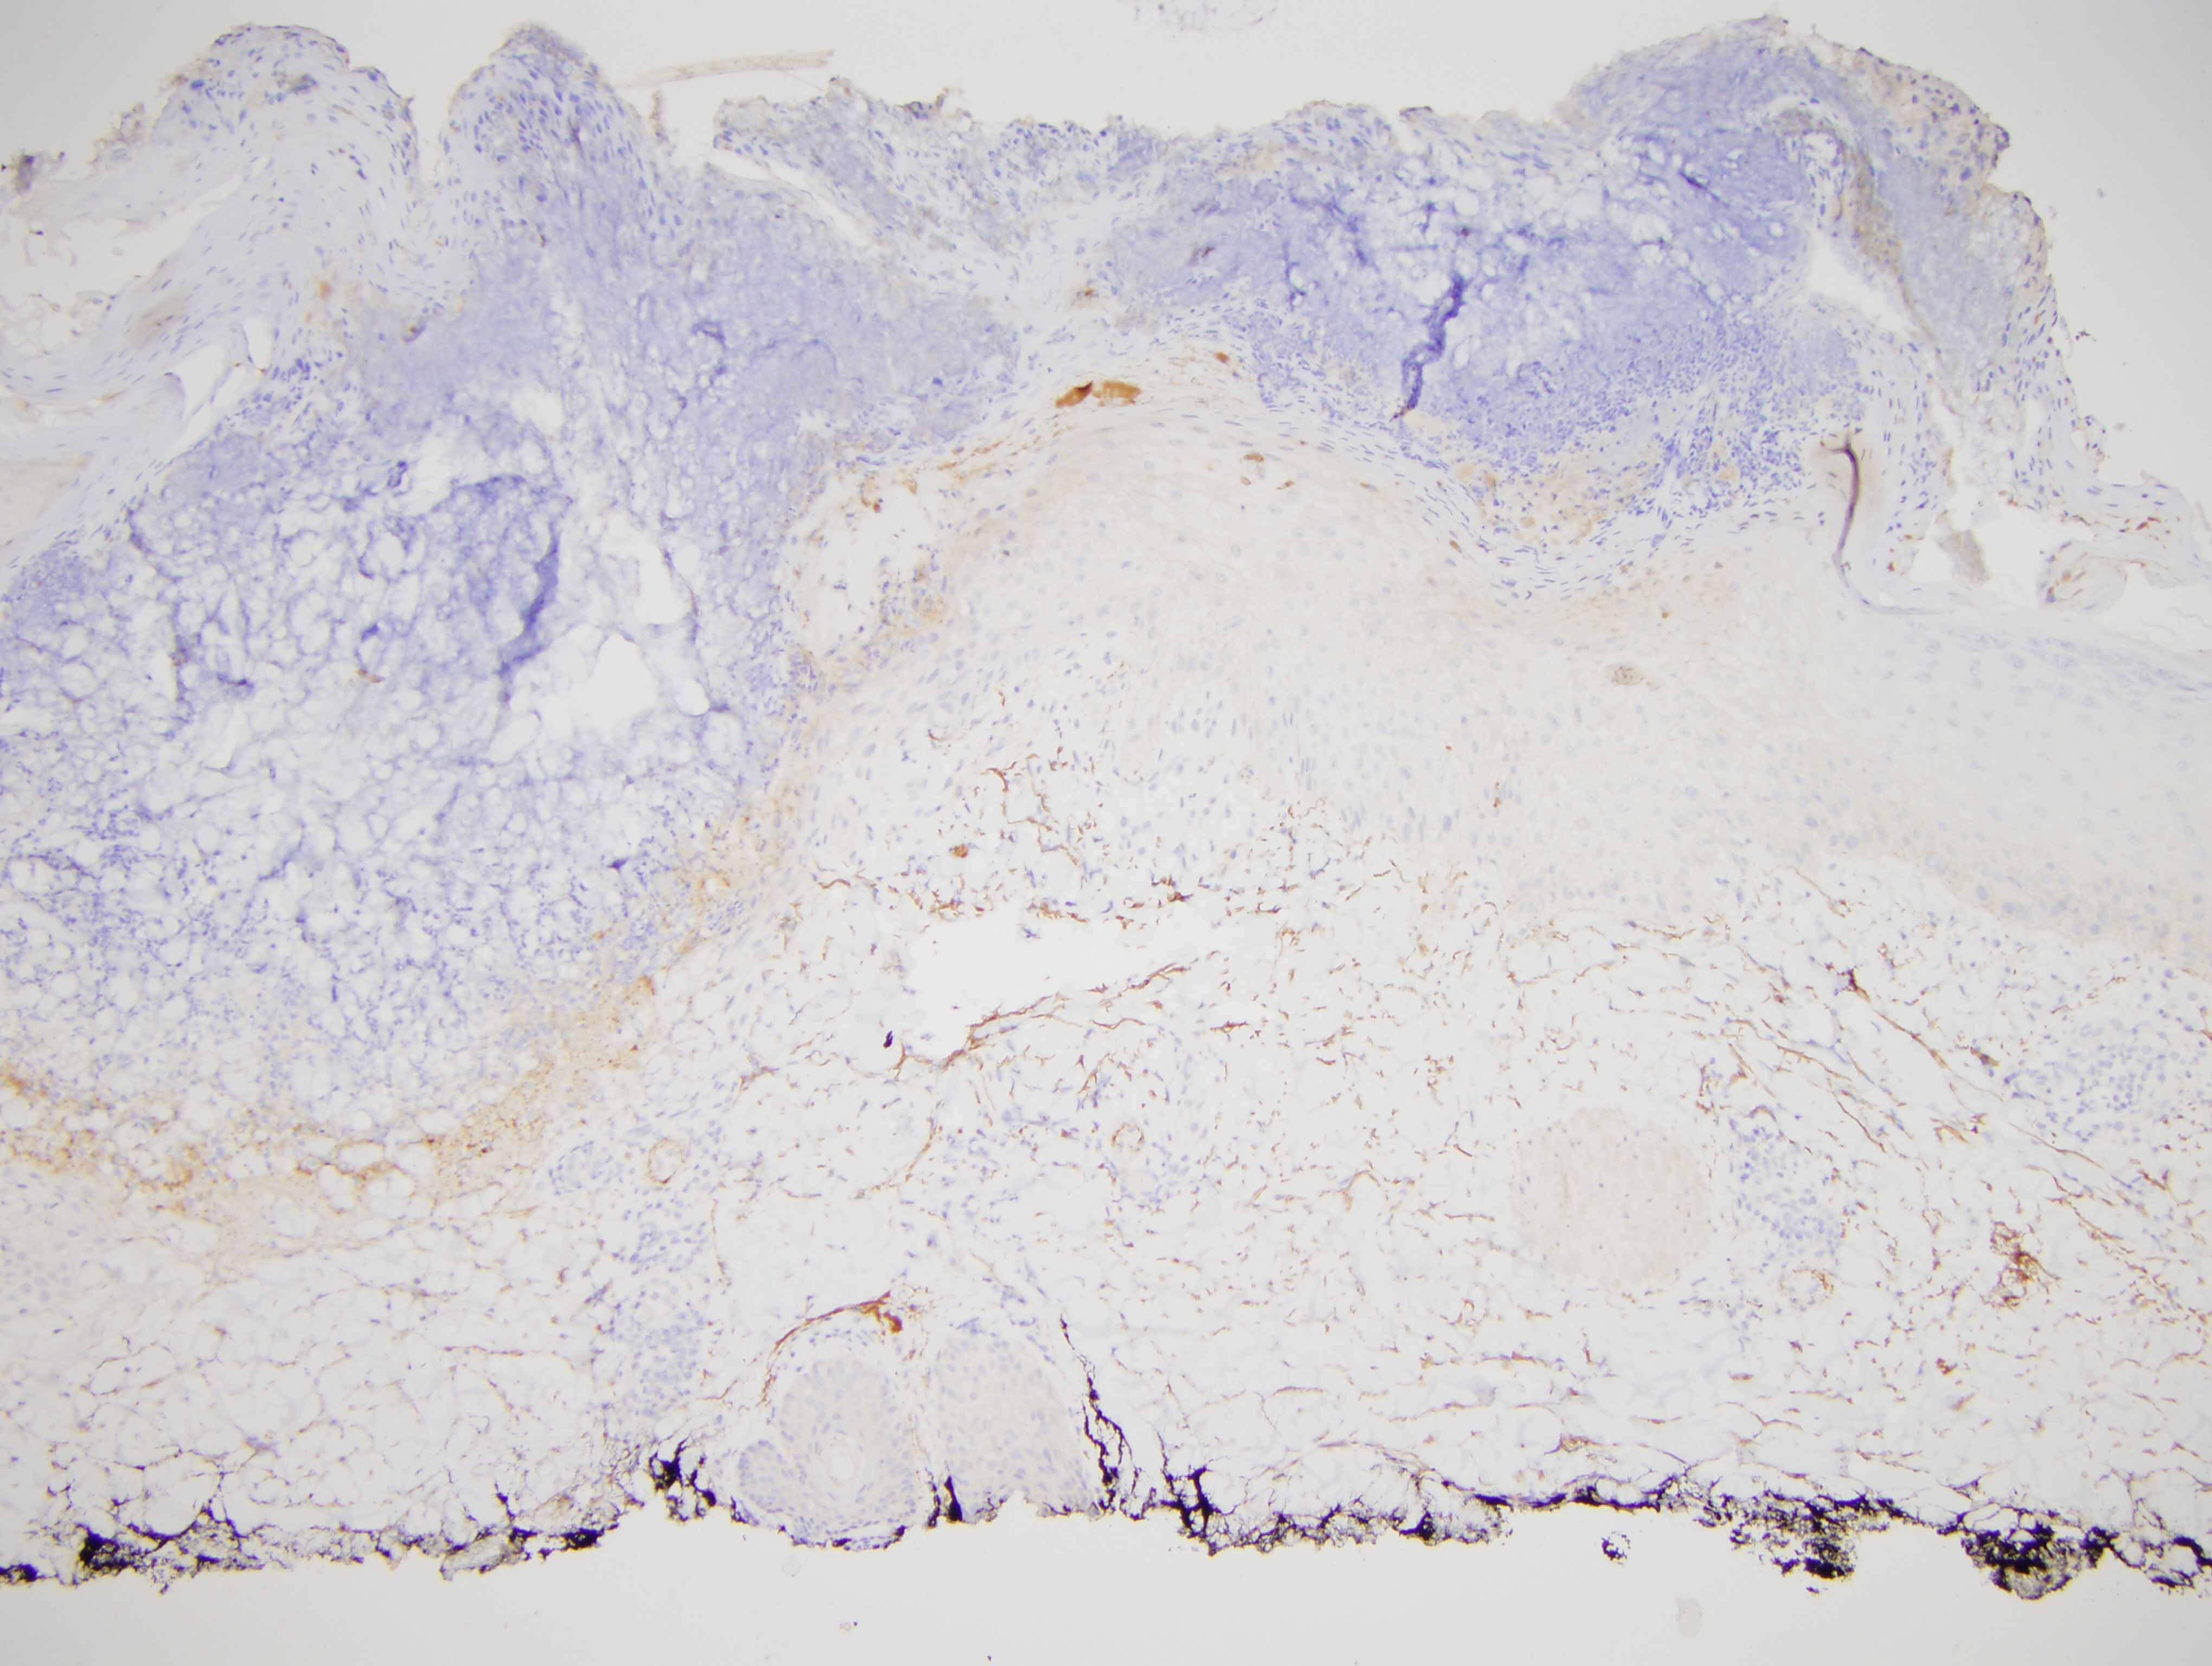 Slide 4: The C3d preparation shows a distinctive pattern of intercellular staining involving the lower third of the epidermis.